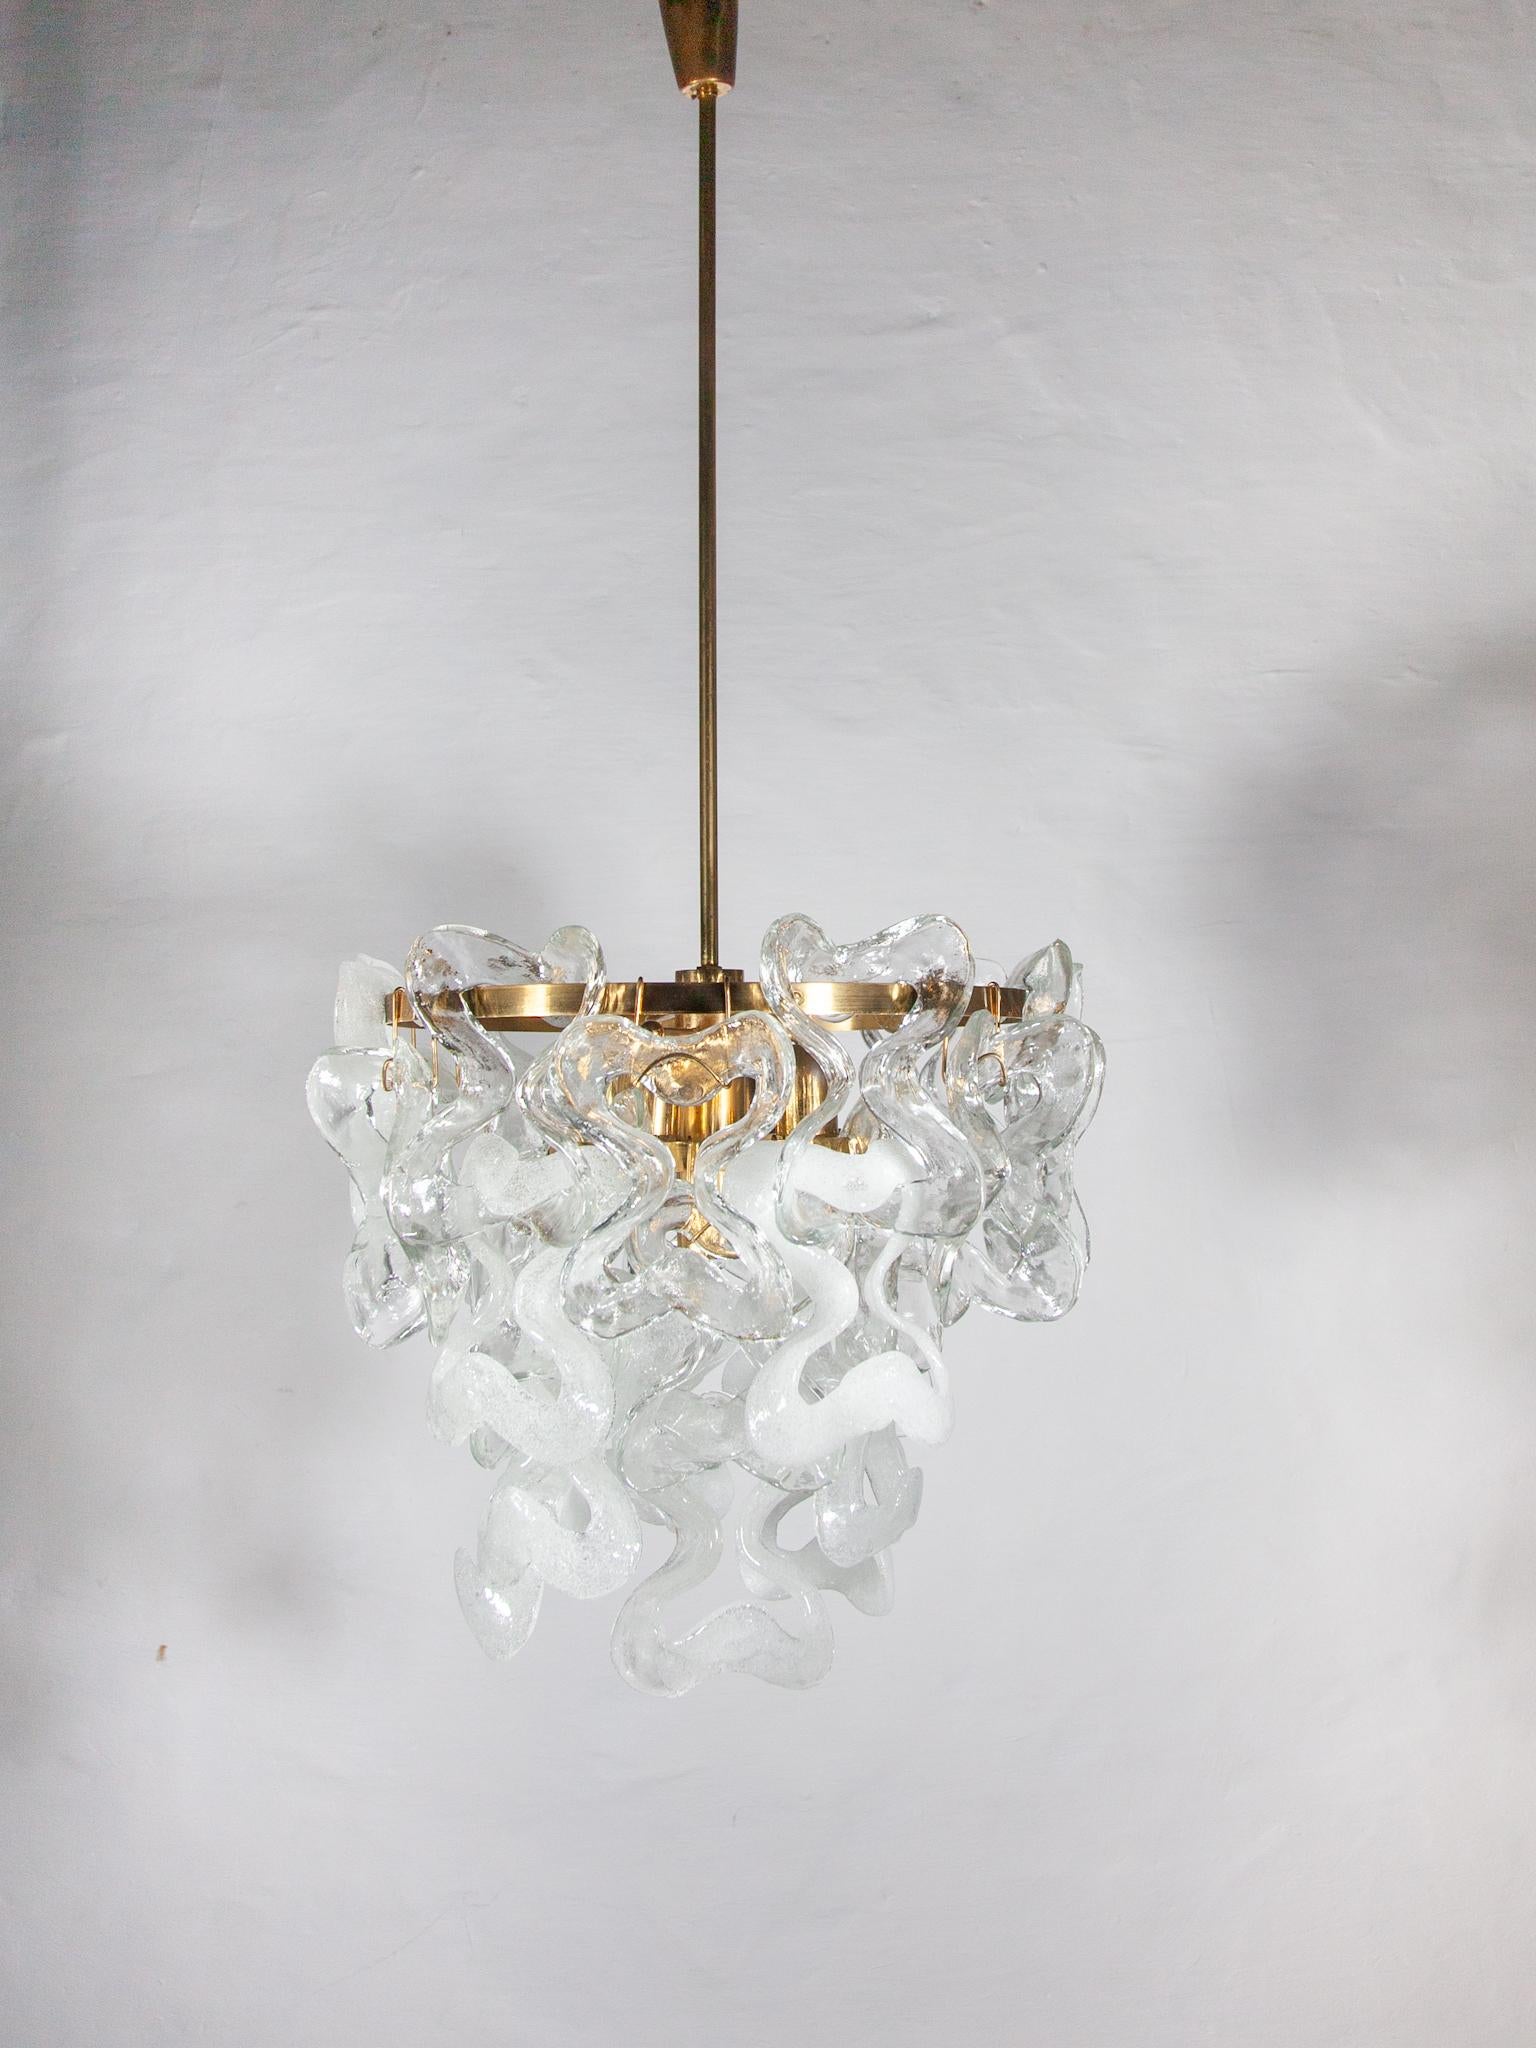 Hand-Crafted Mazzega Interlocking Glass Panels Chandelier 1960s For Sale